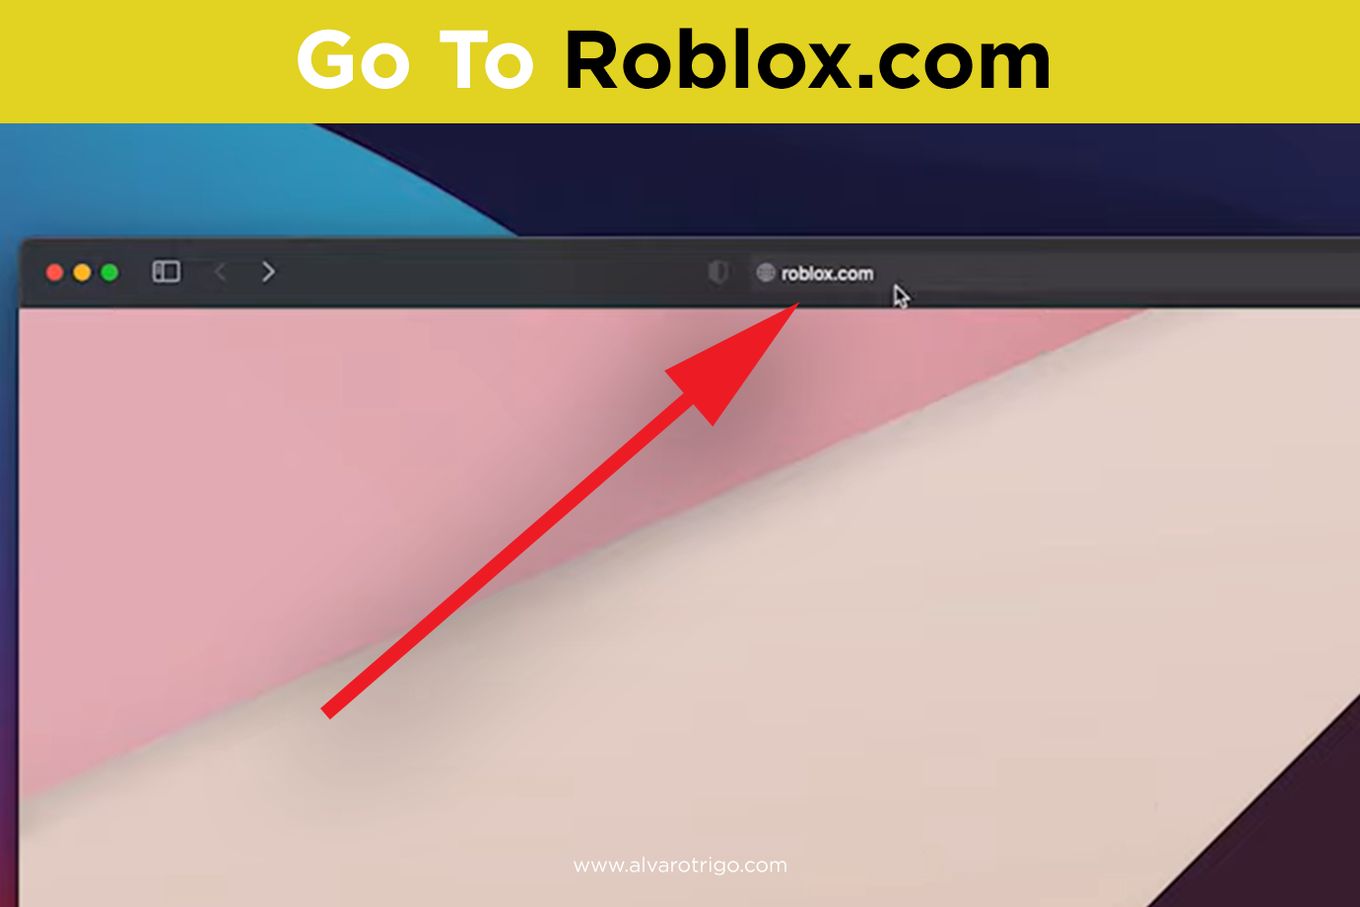 Type Roblox.com in any browser